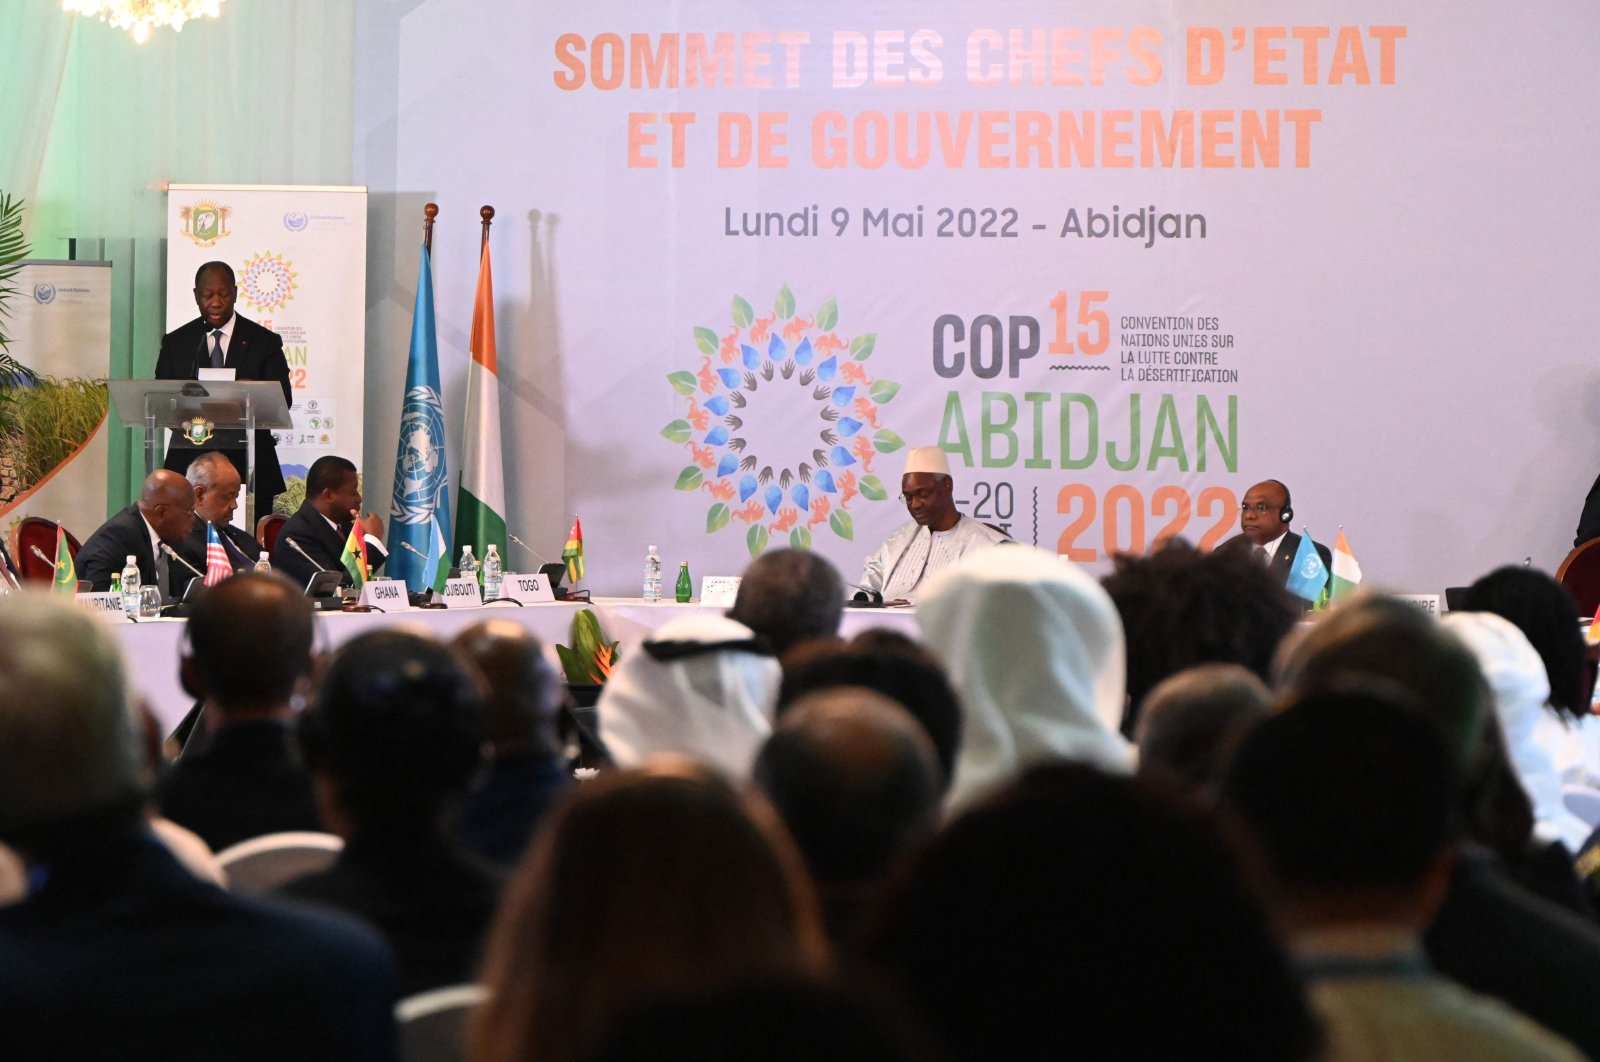 Ivorian President Alassane Ouattara (back L) speaks during the opening ceremony of the COP15 at the Sofitel Ivoire hotel in Abidjan, Ivory Coast, May 9, 2022. (AFP Photo)